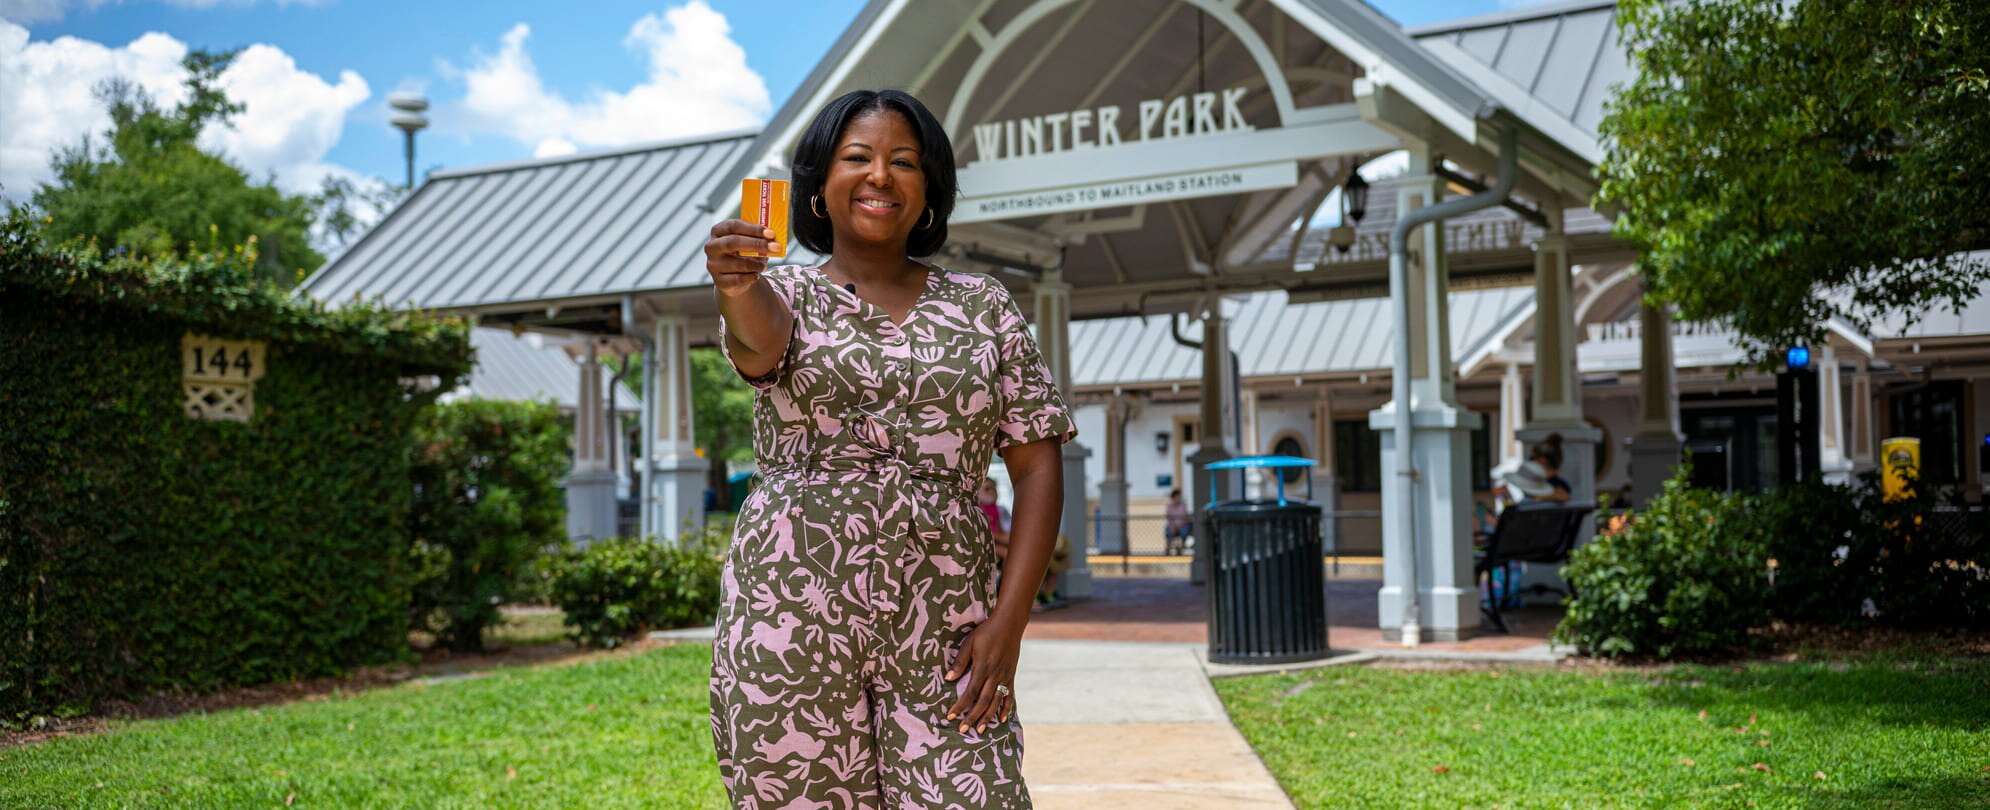 A woman is holding a travel ticket in front of a sign that says Winter Park.